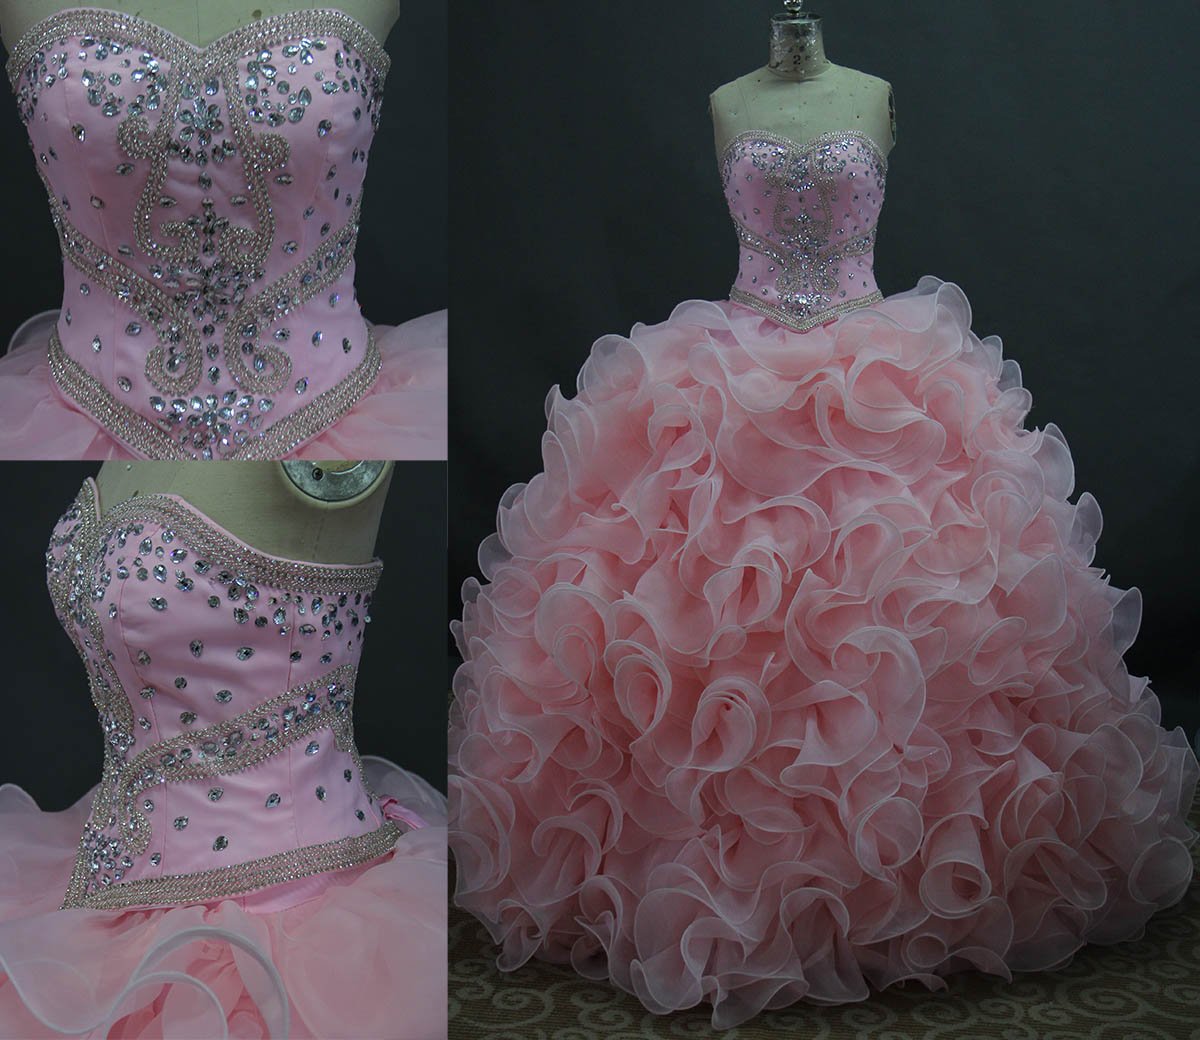 Quinceanera Dresses, Pink Prom Dresses, Ball Gown Prom Dresses, Sweet 16 Dresses, Pageant Dresses For Women, Beaded Prom Dresses, Crystals Prom